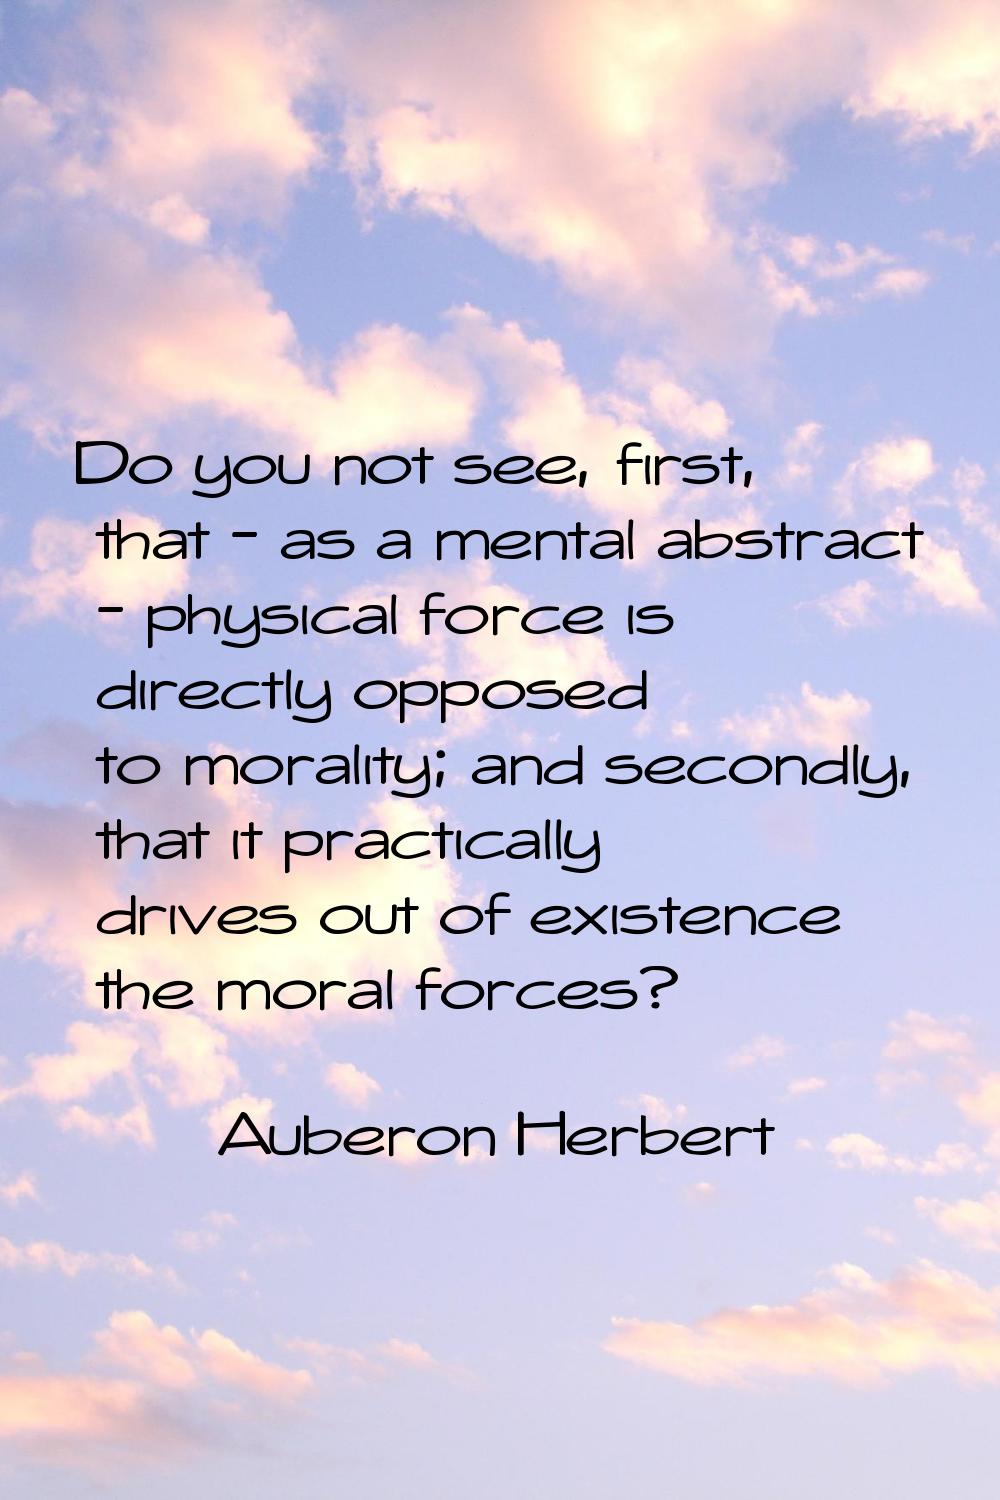 Do you not see, first, that - as a mental abstract - physical force is directly opposed to morality